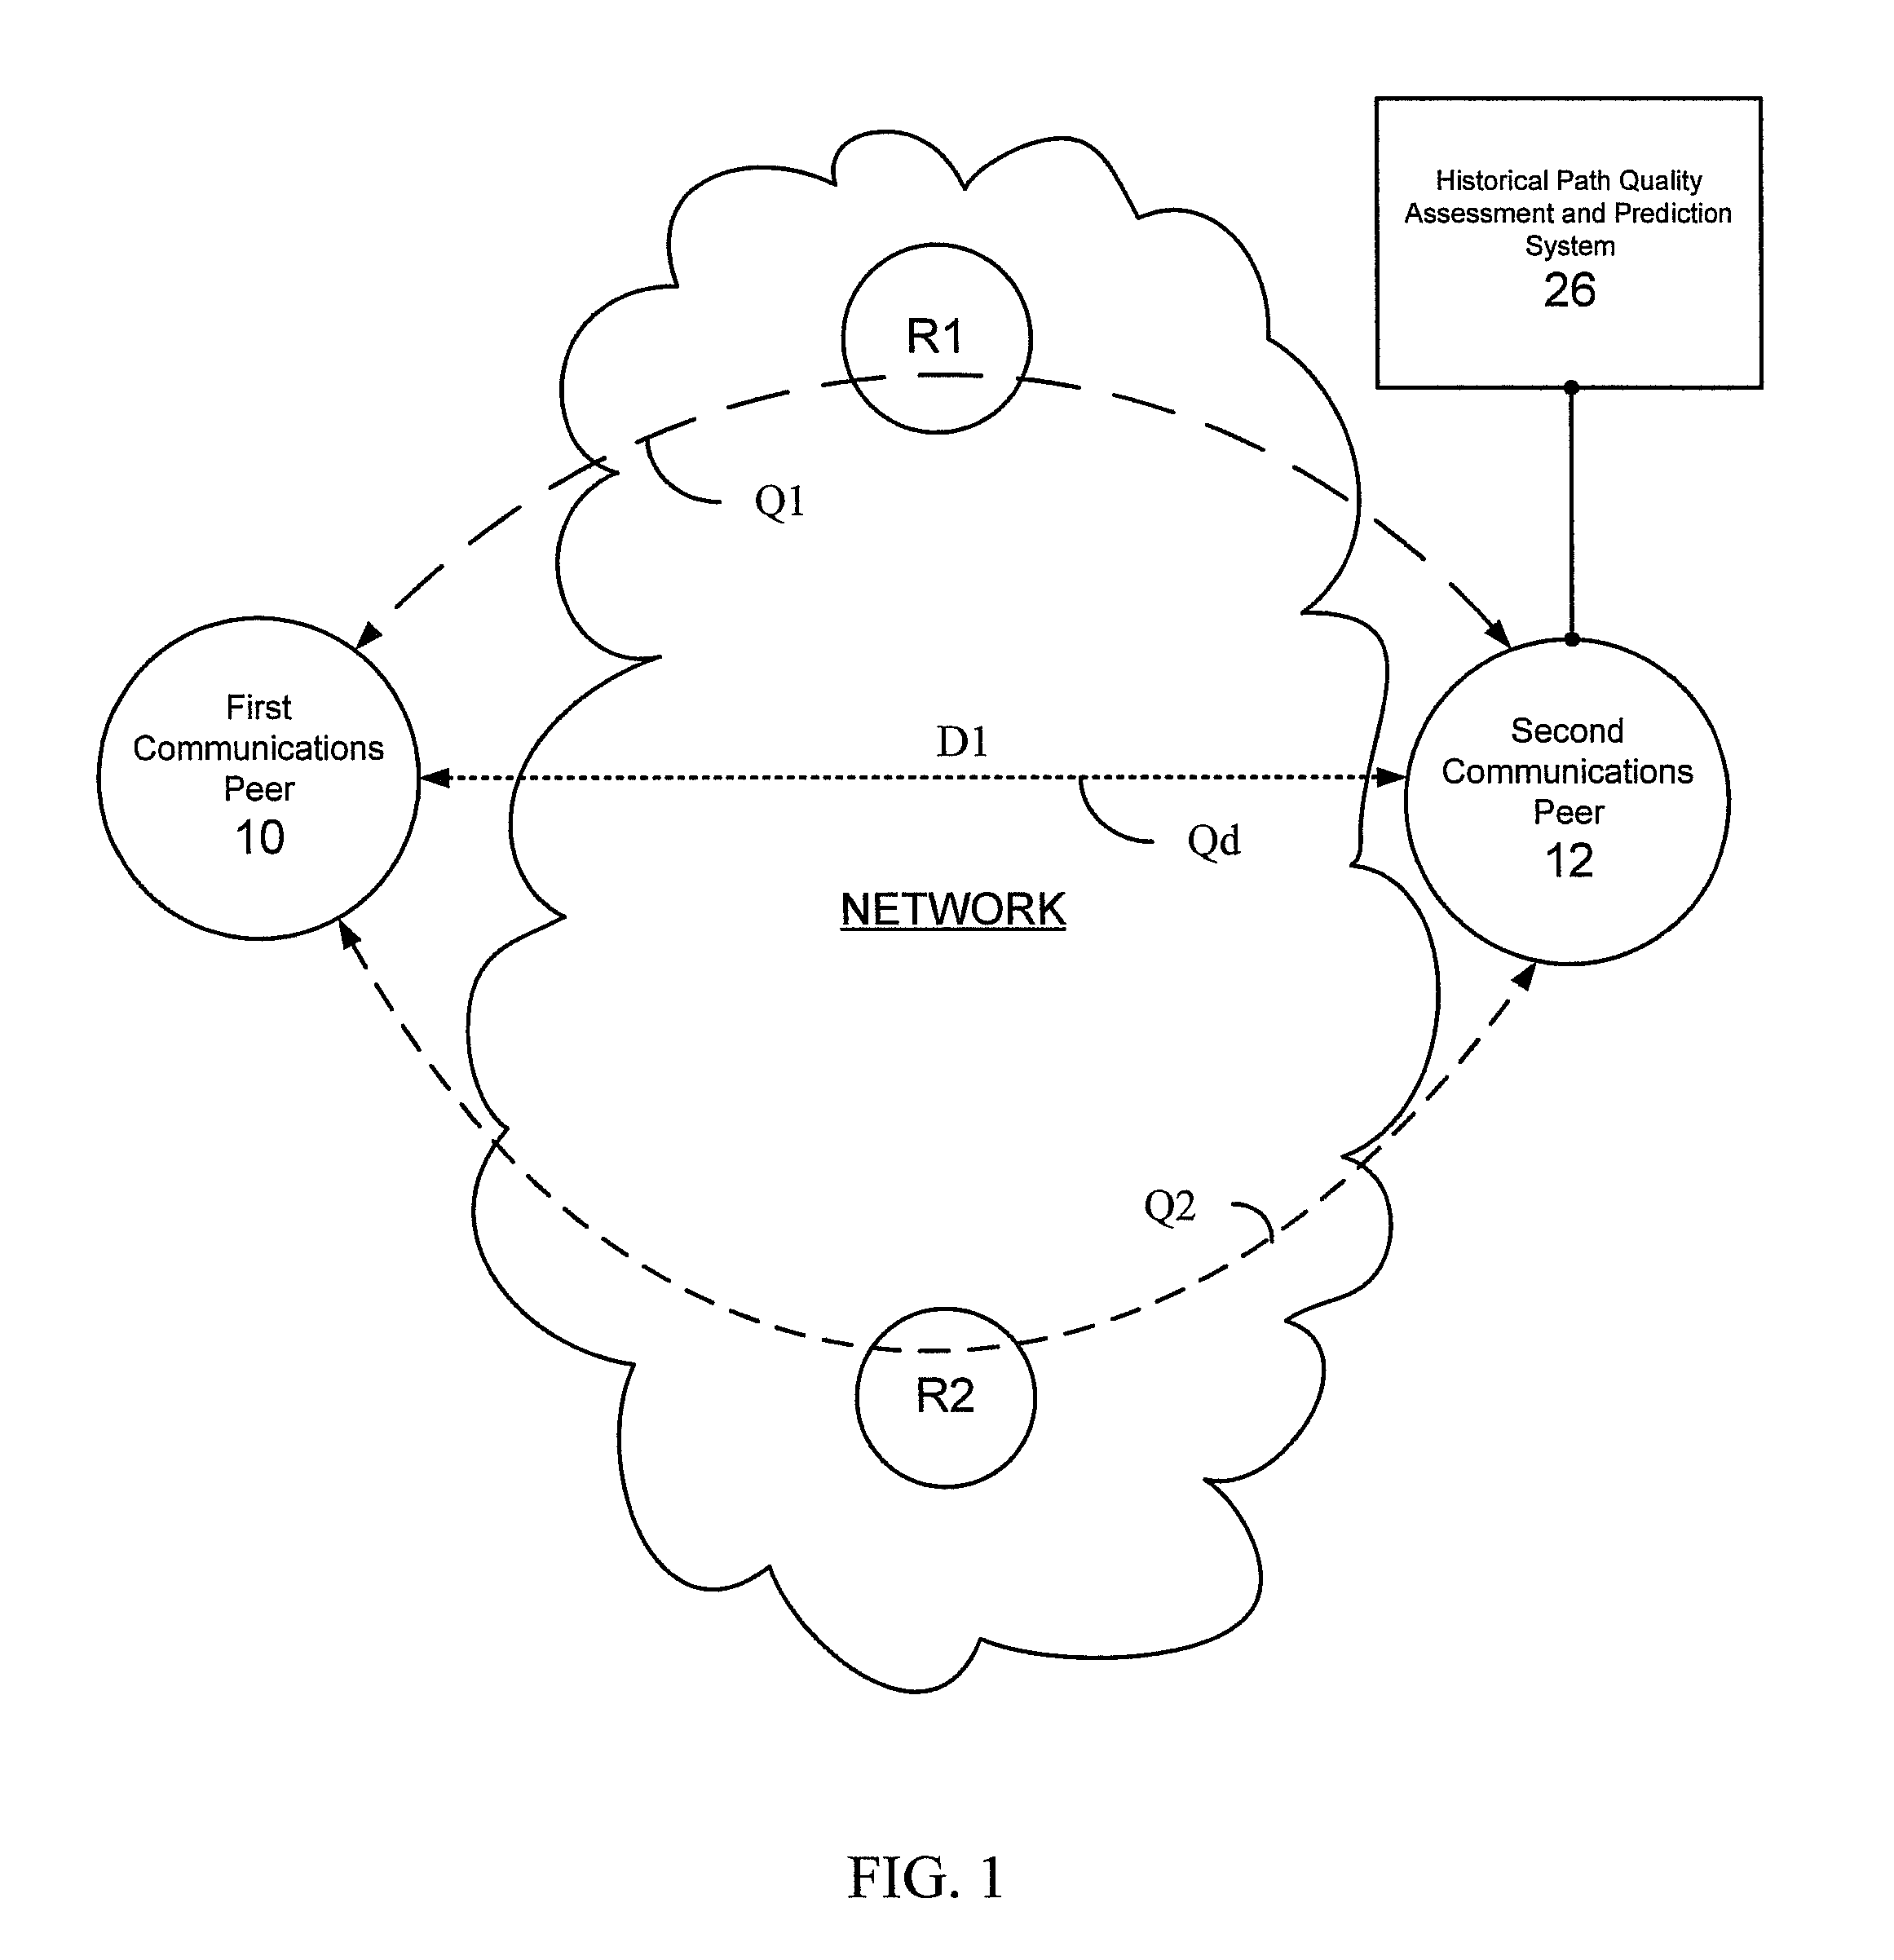 System and method of controlling in-bound path selection based on historical and continuous path quality monitoring, assessment and predictions